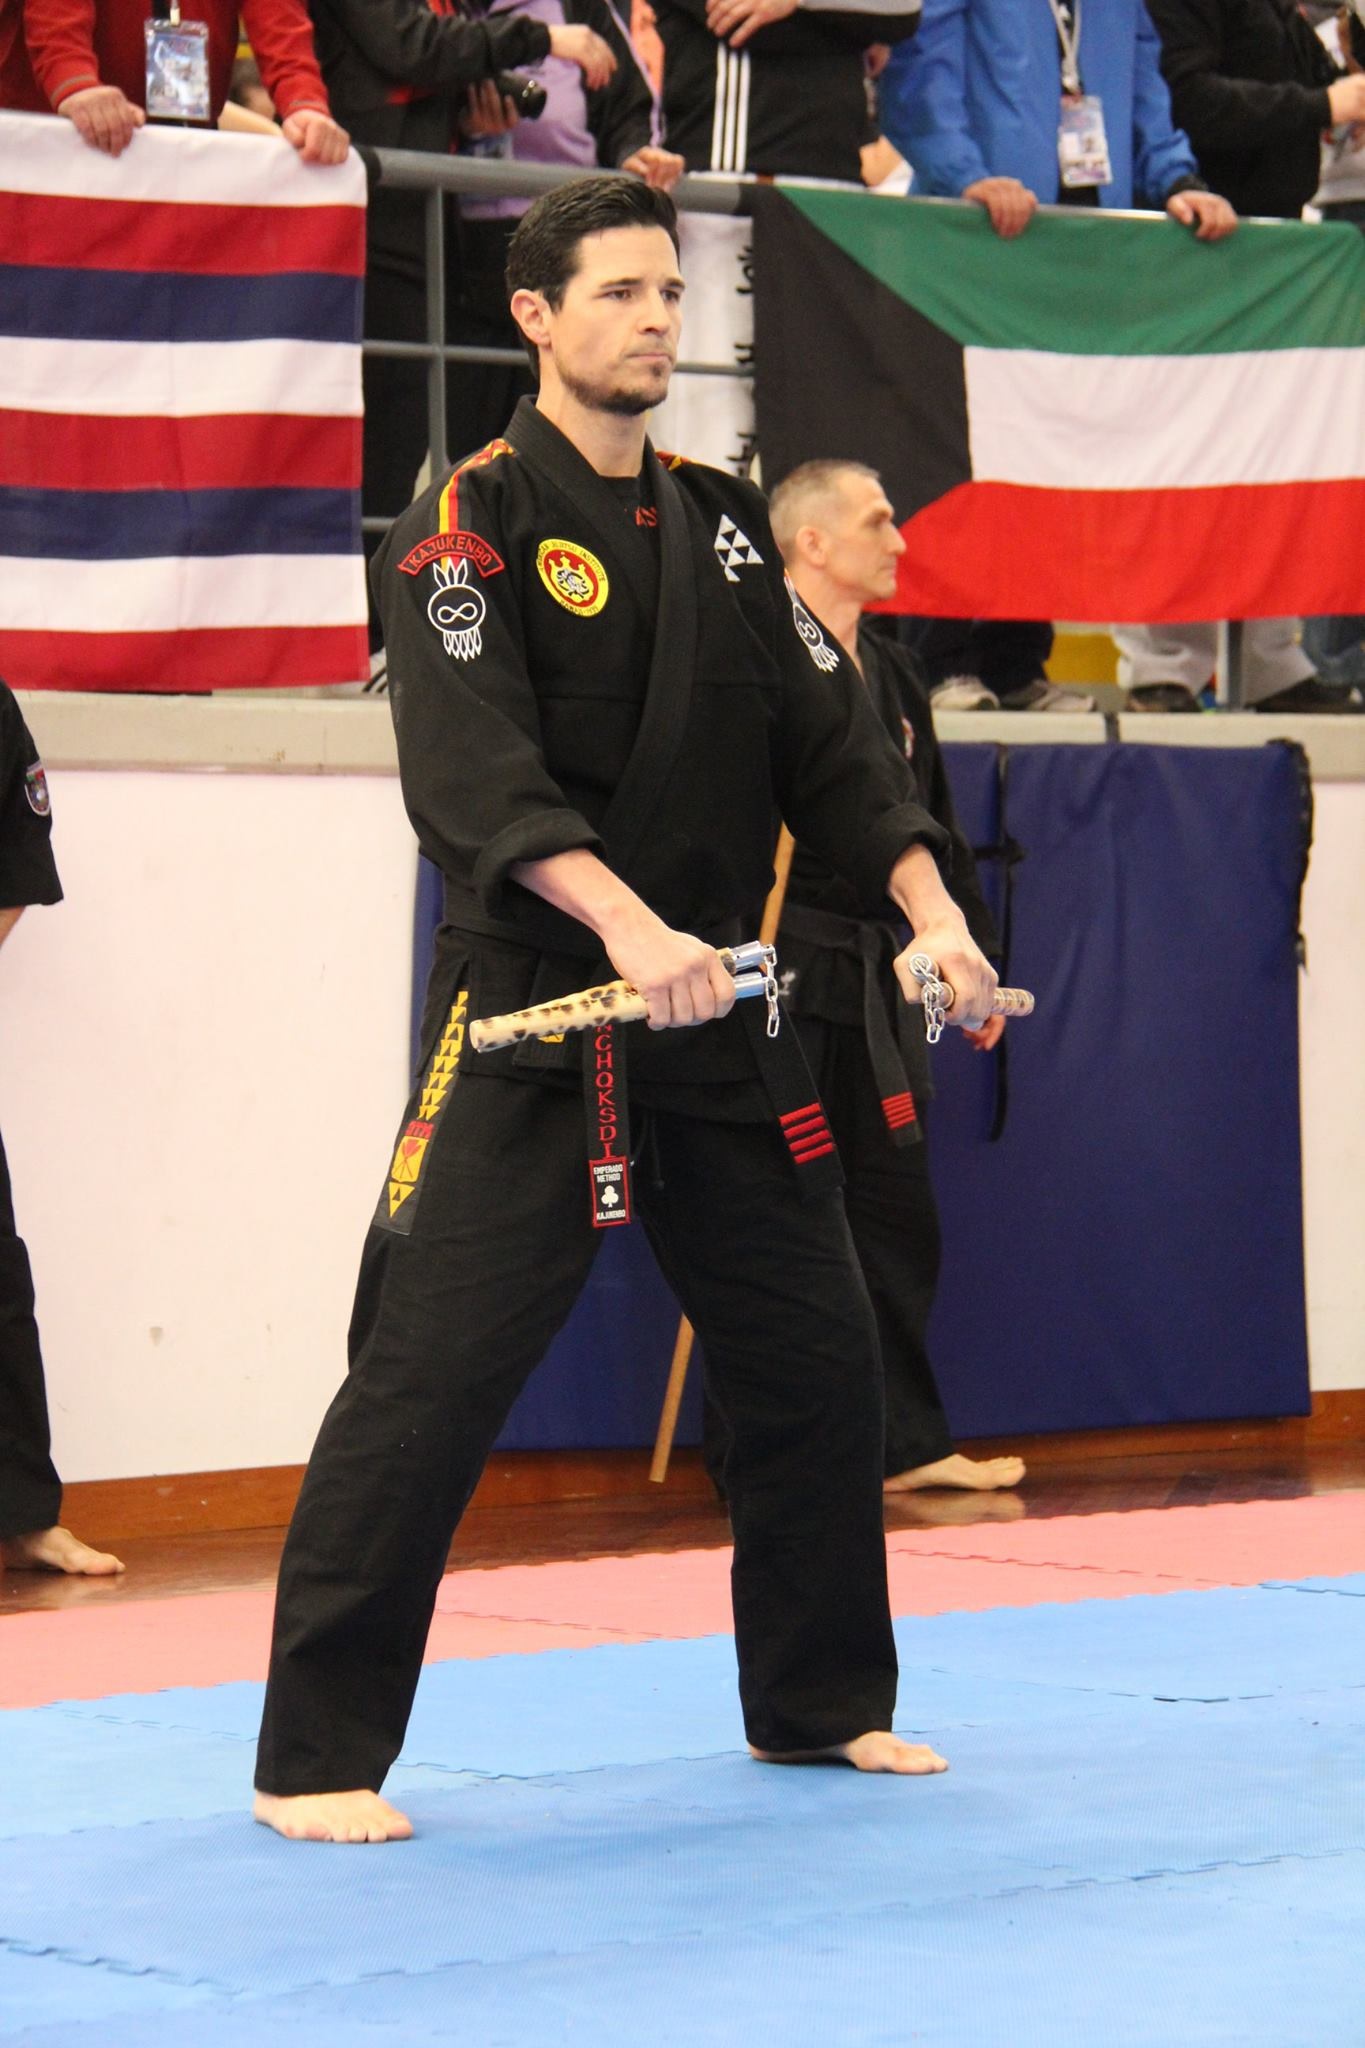 Lucas Sullivan competing at the 2014 World All Styles Championships in Portugal. He came home a world Champion in both Weapons and Hard-Style Forms.